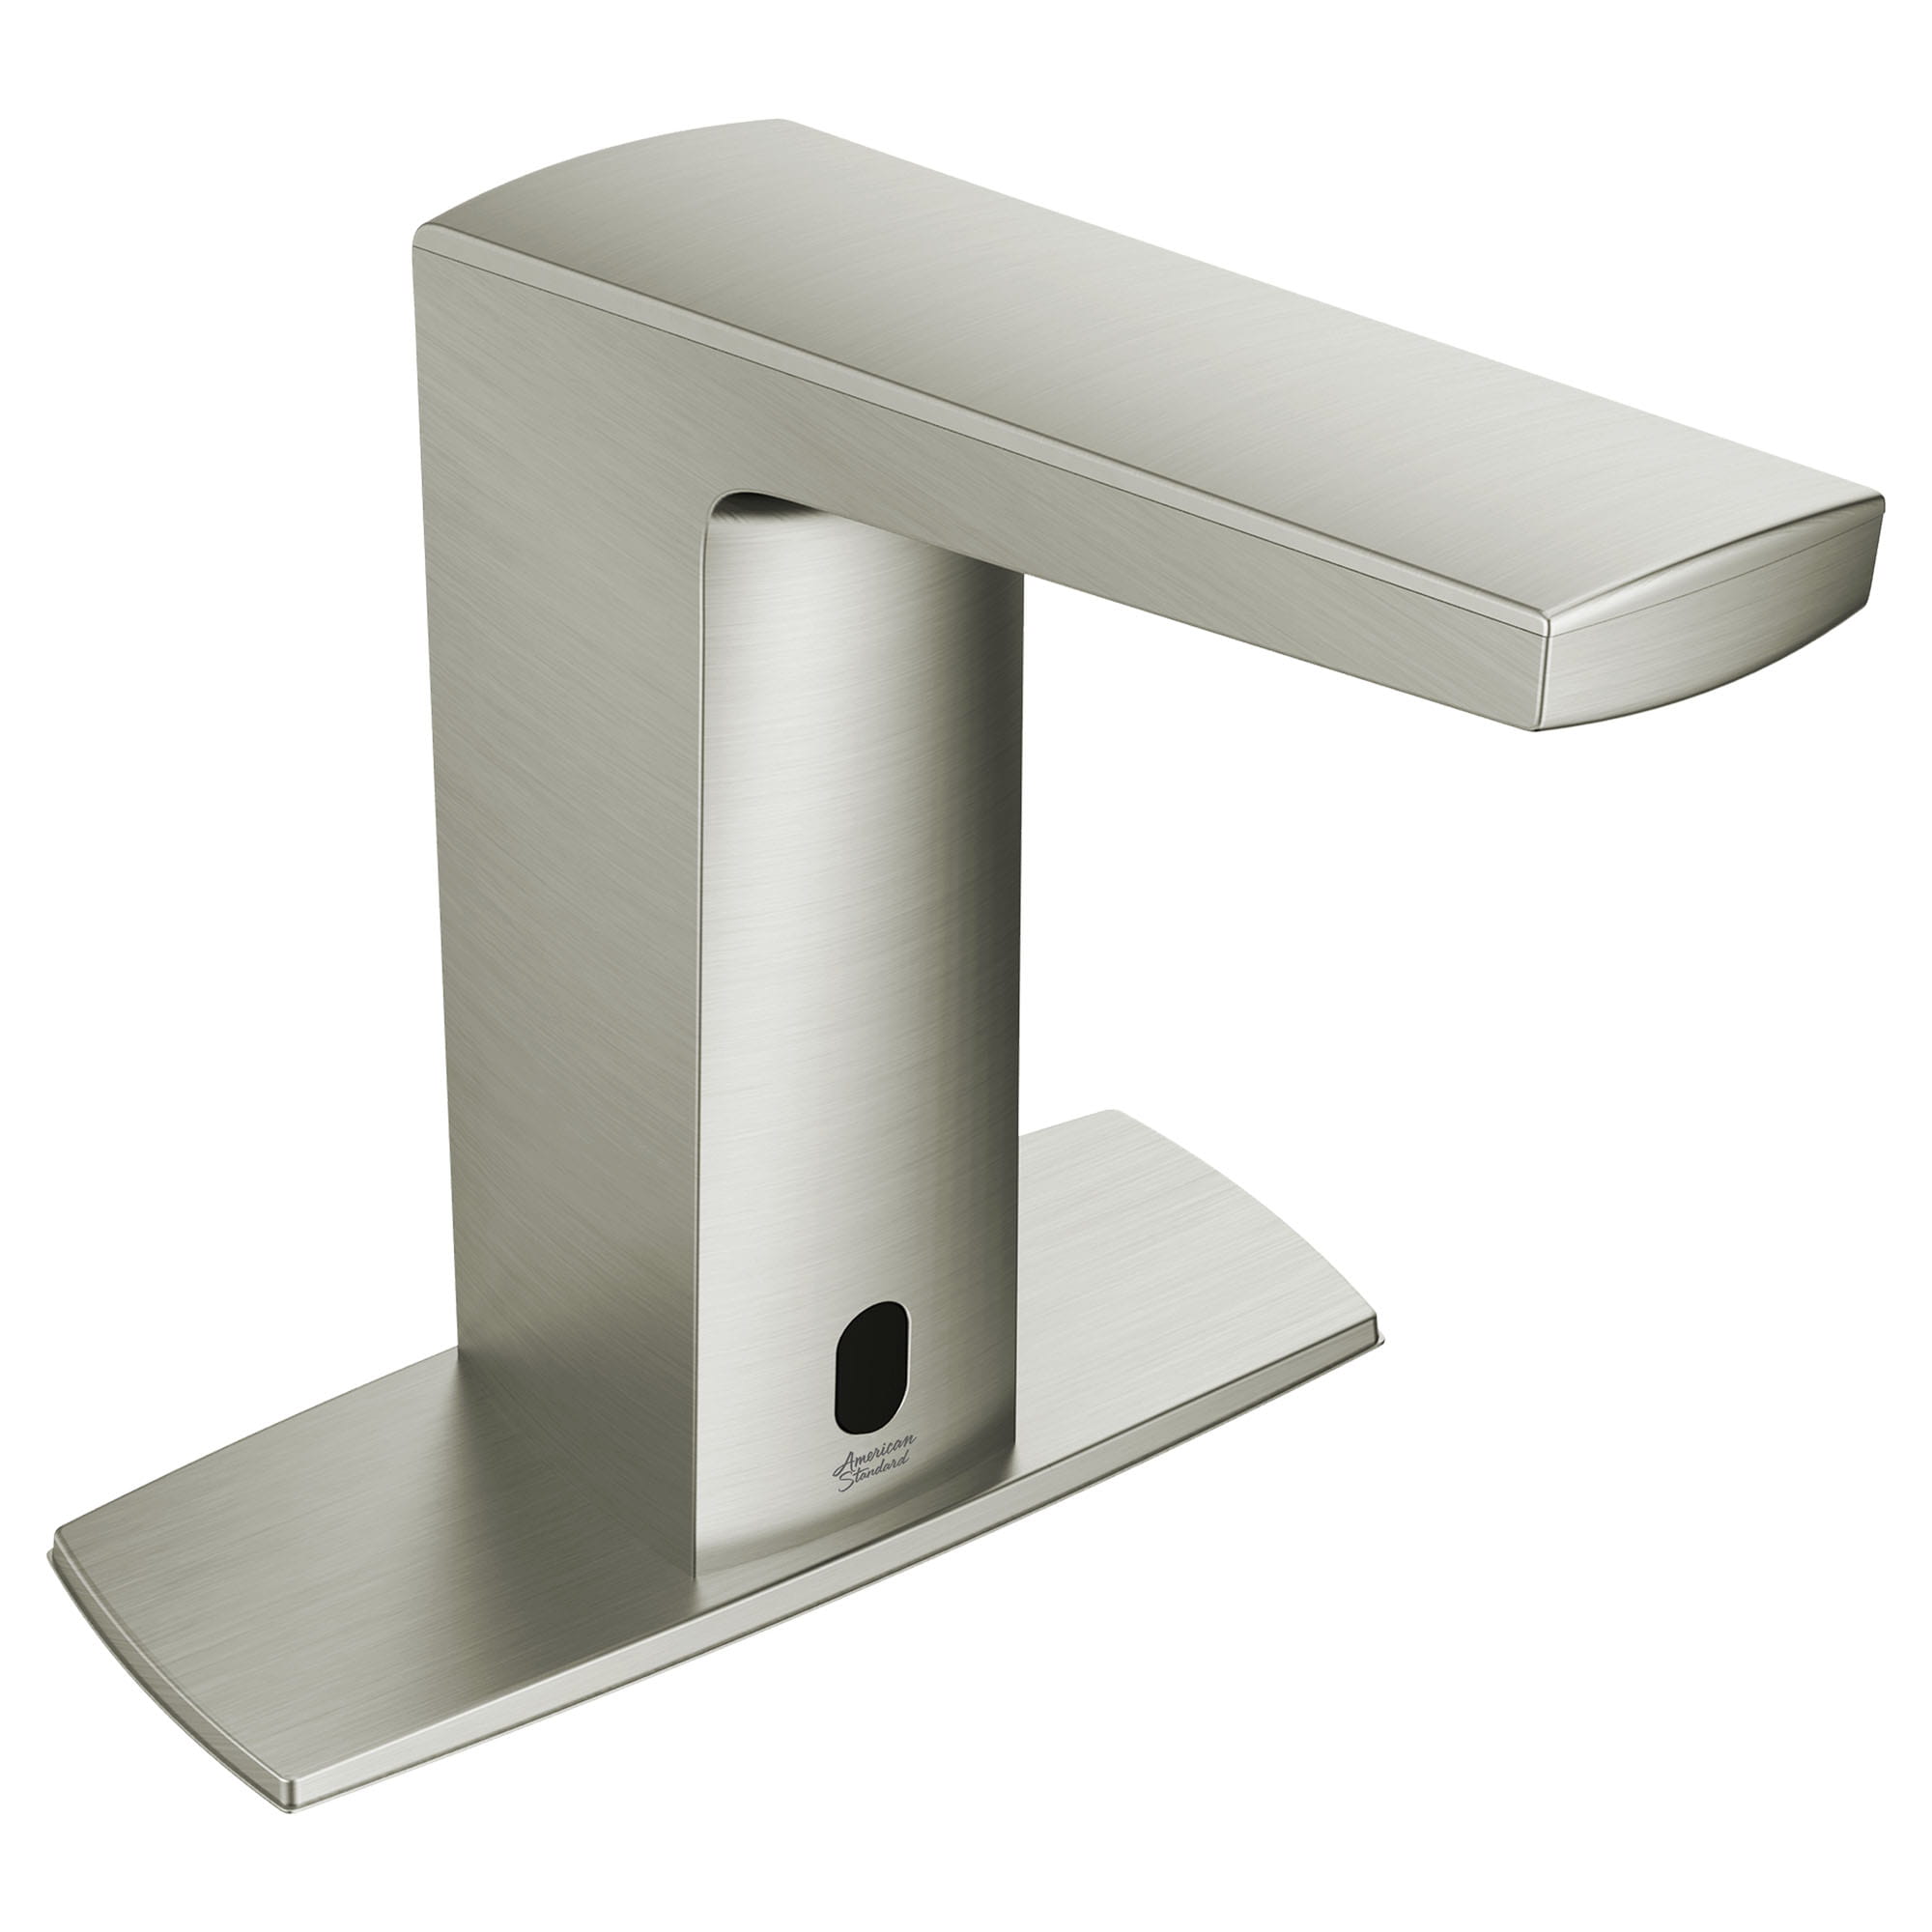 Paradigm® Selectronic® Touchless Faucet, Battery-Powered With Above-Deck Mixing, 0.35 gpm/1.3 Lpm